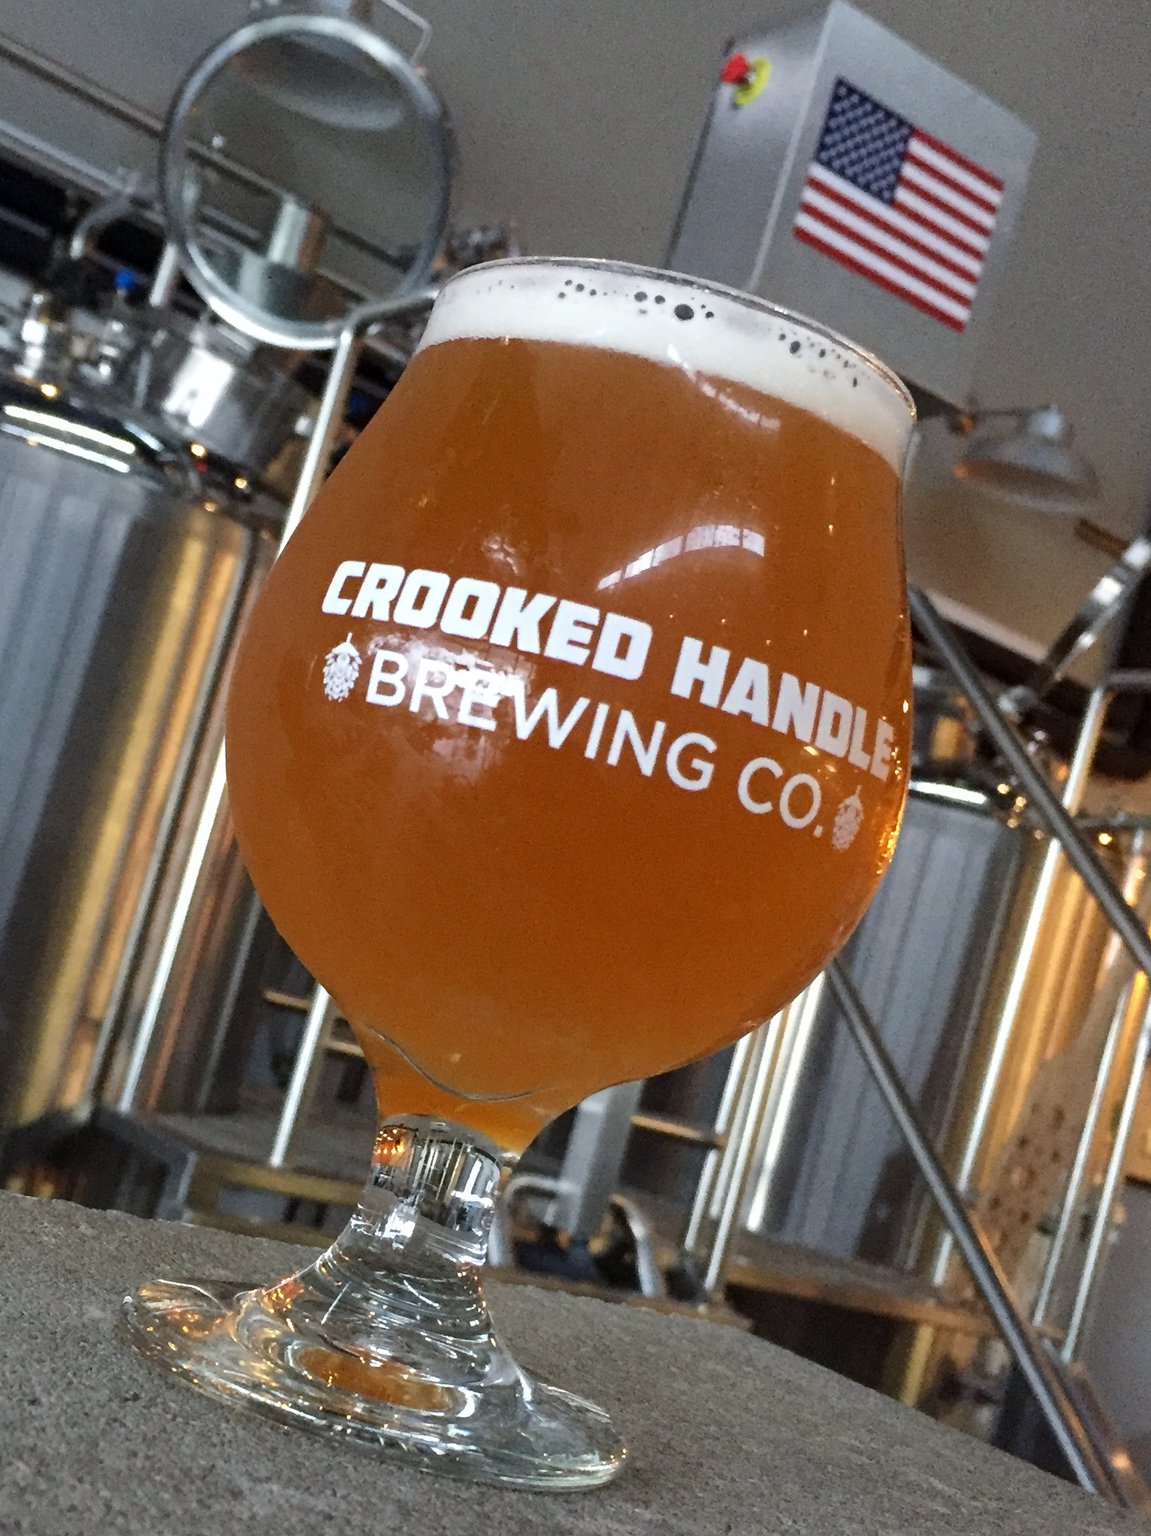 Crooked Handle Brewing Co. is located at 760 N. Main Street in Springboro.